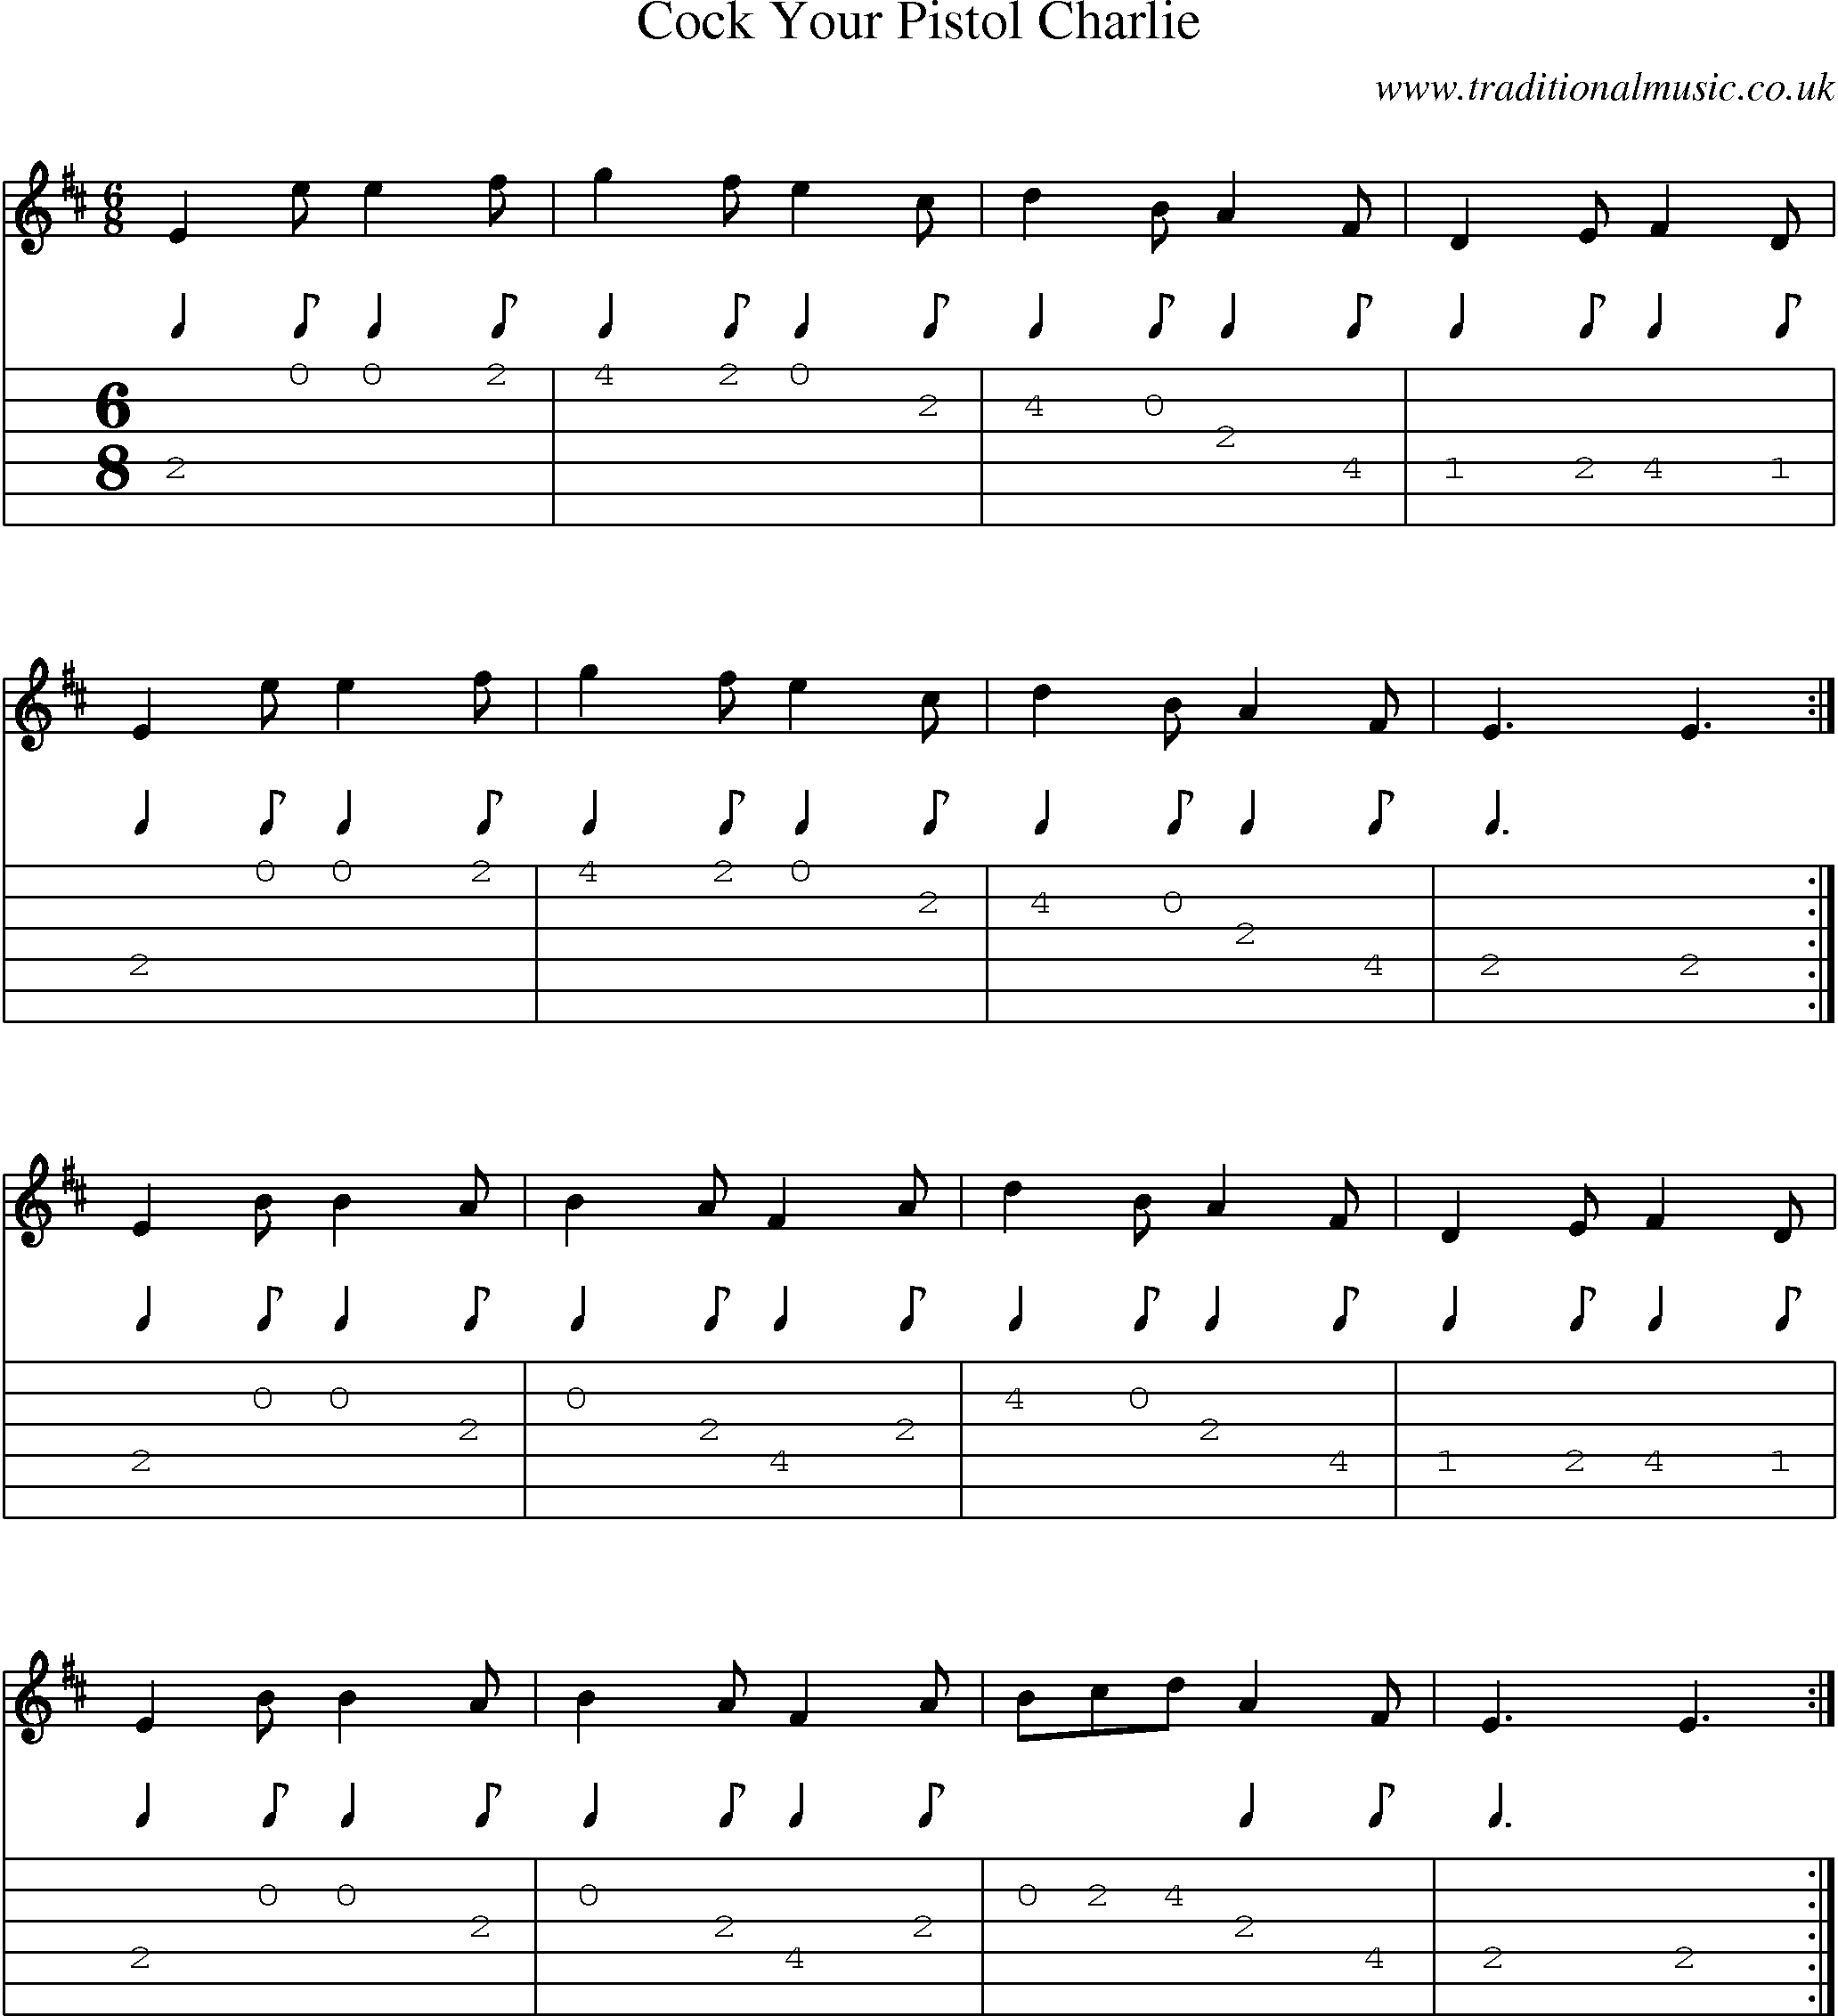 Music Score and Guitar Tabs for Cock Your Pistol Charlie